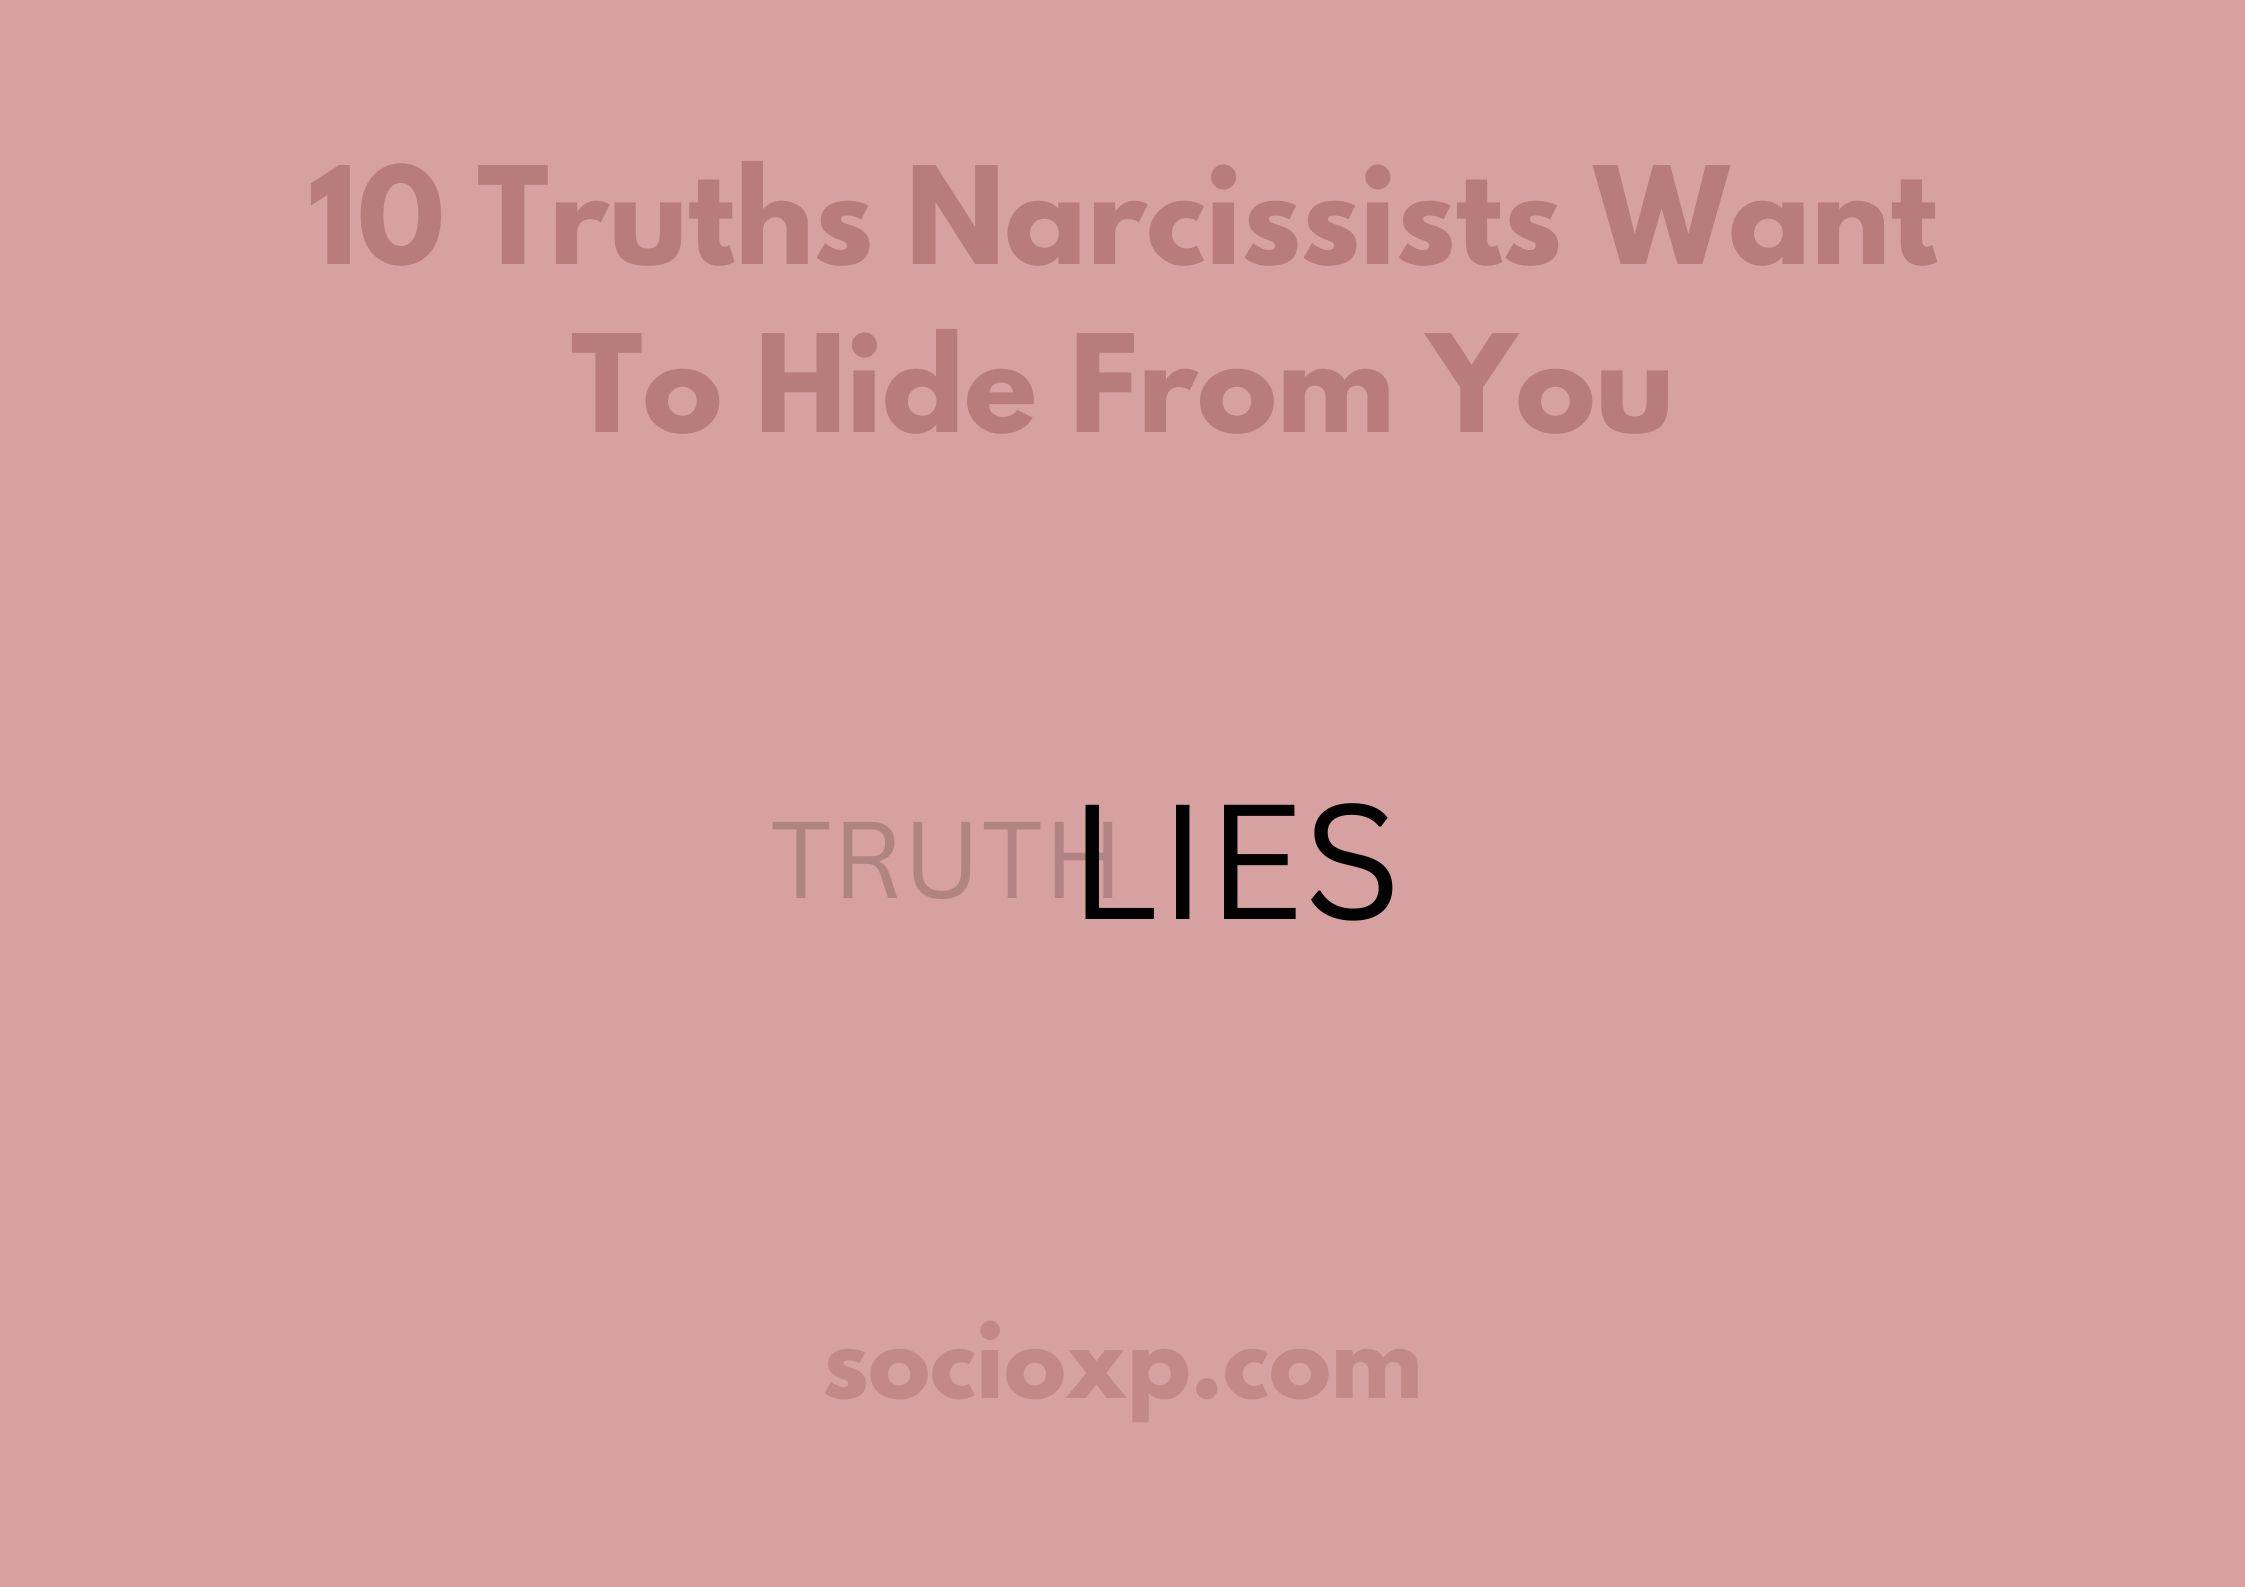 10 Truths Narcissists Want To Hide From You